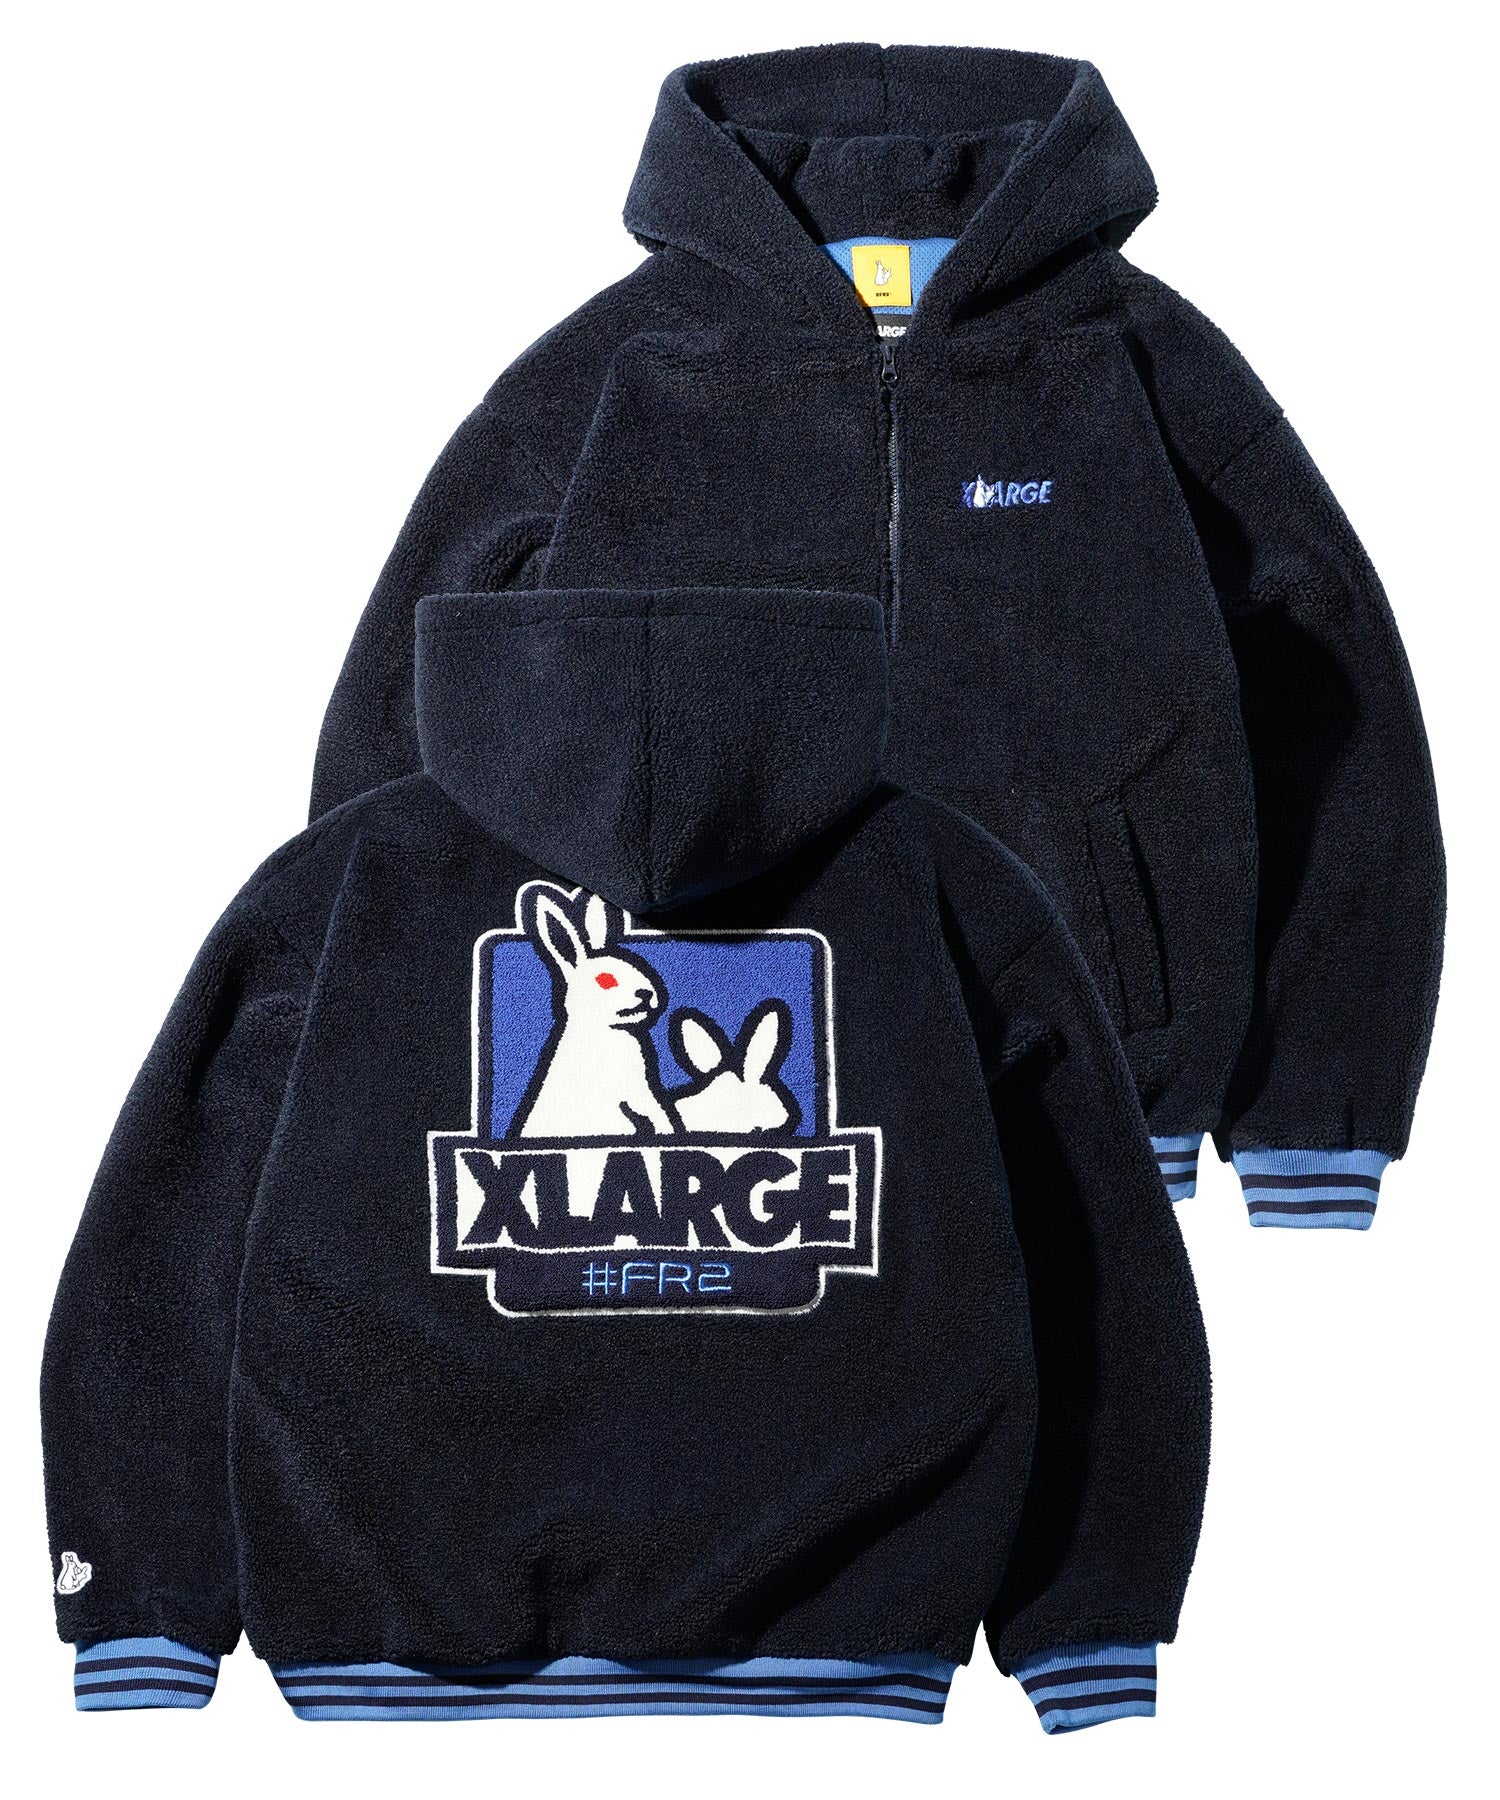 XLARGE Collaboration with ＃FR2